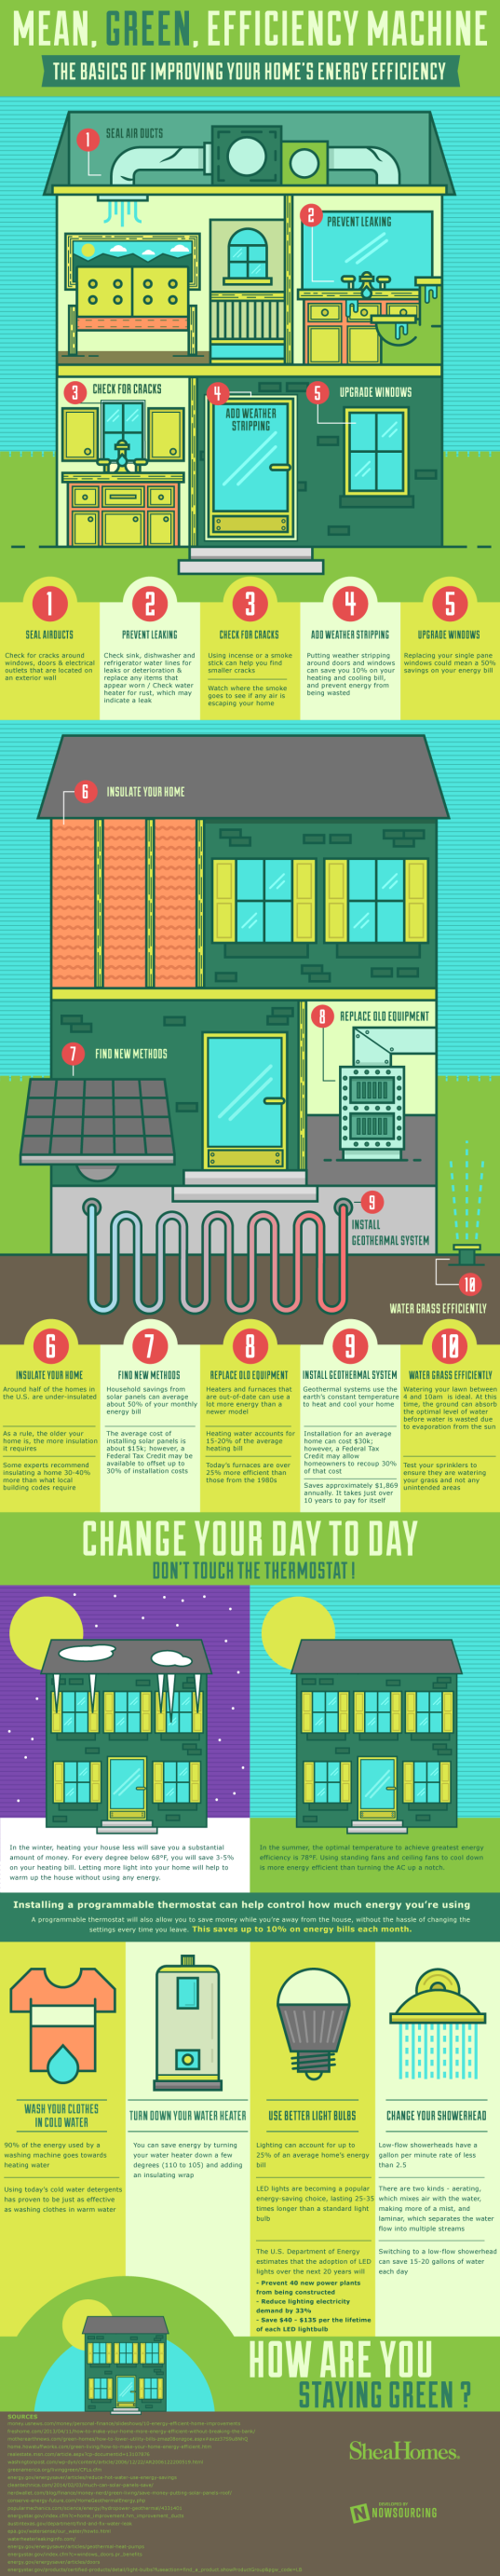 eco-friendly home infographics to go gree and save green - ecos paints